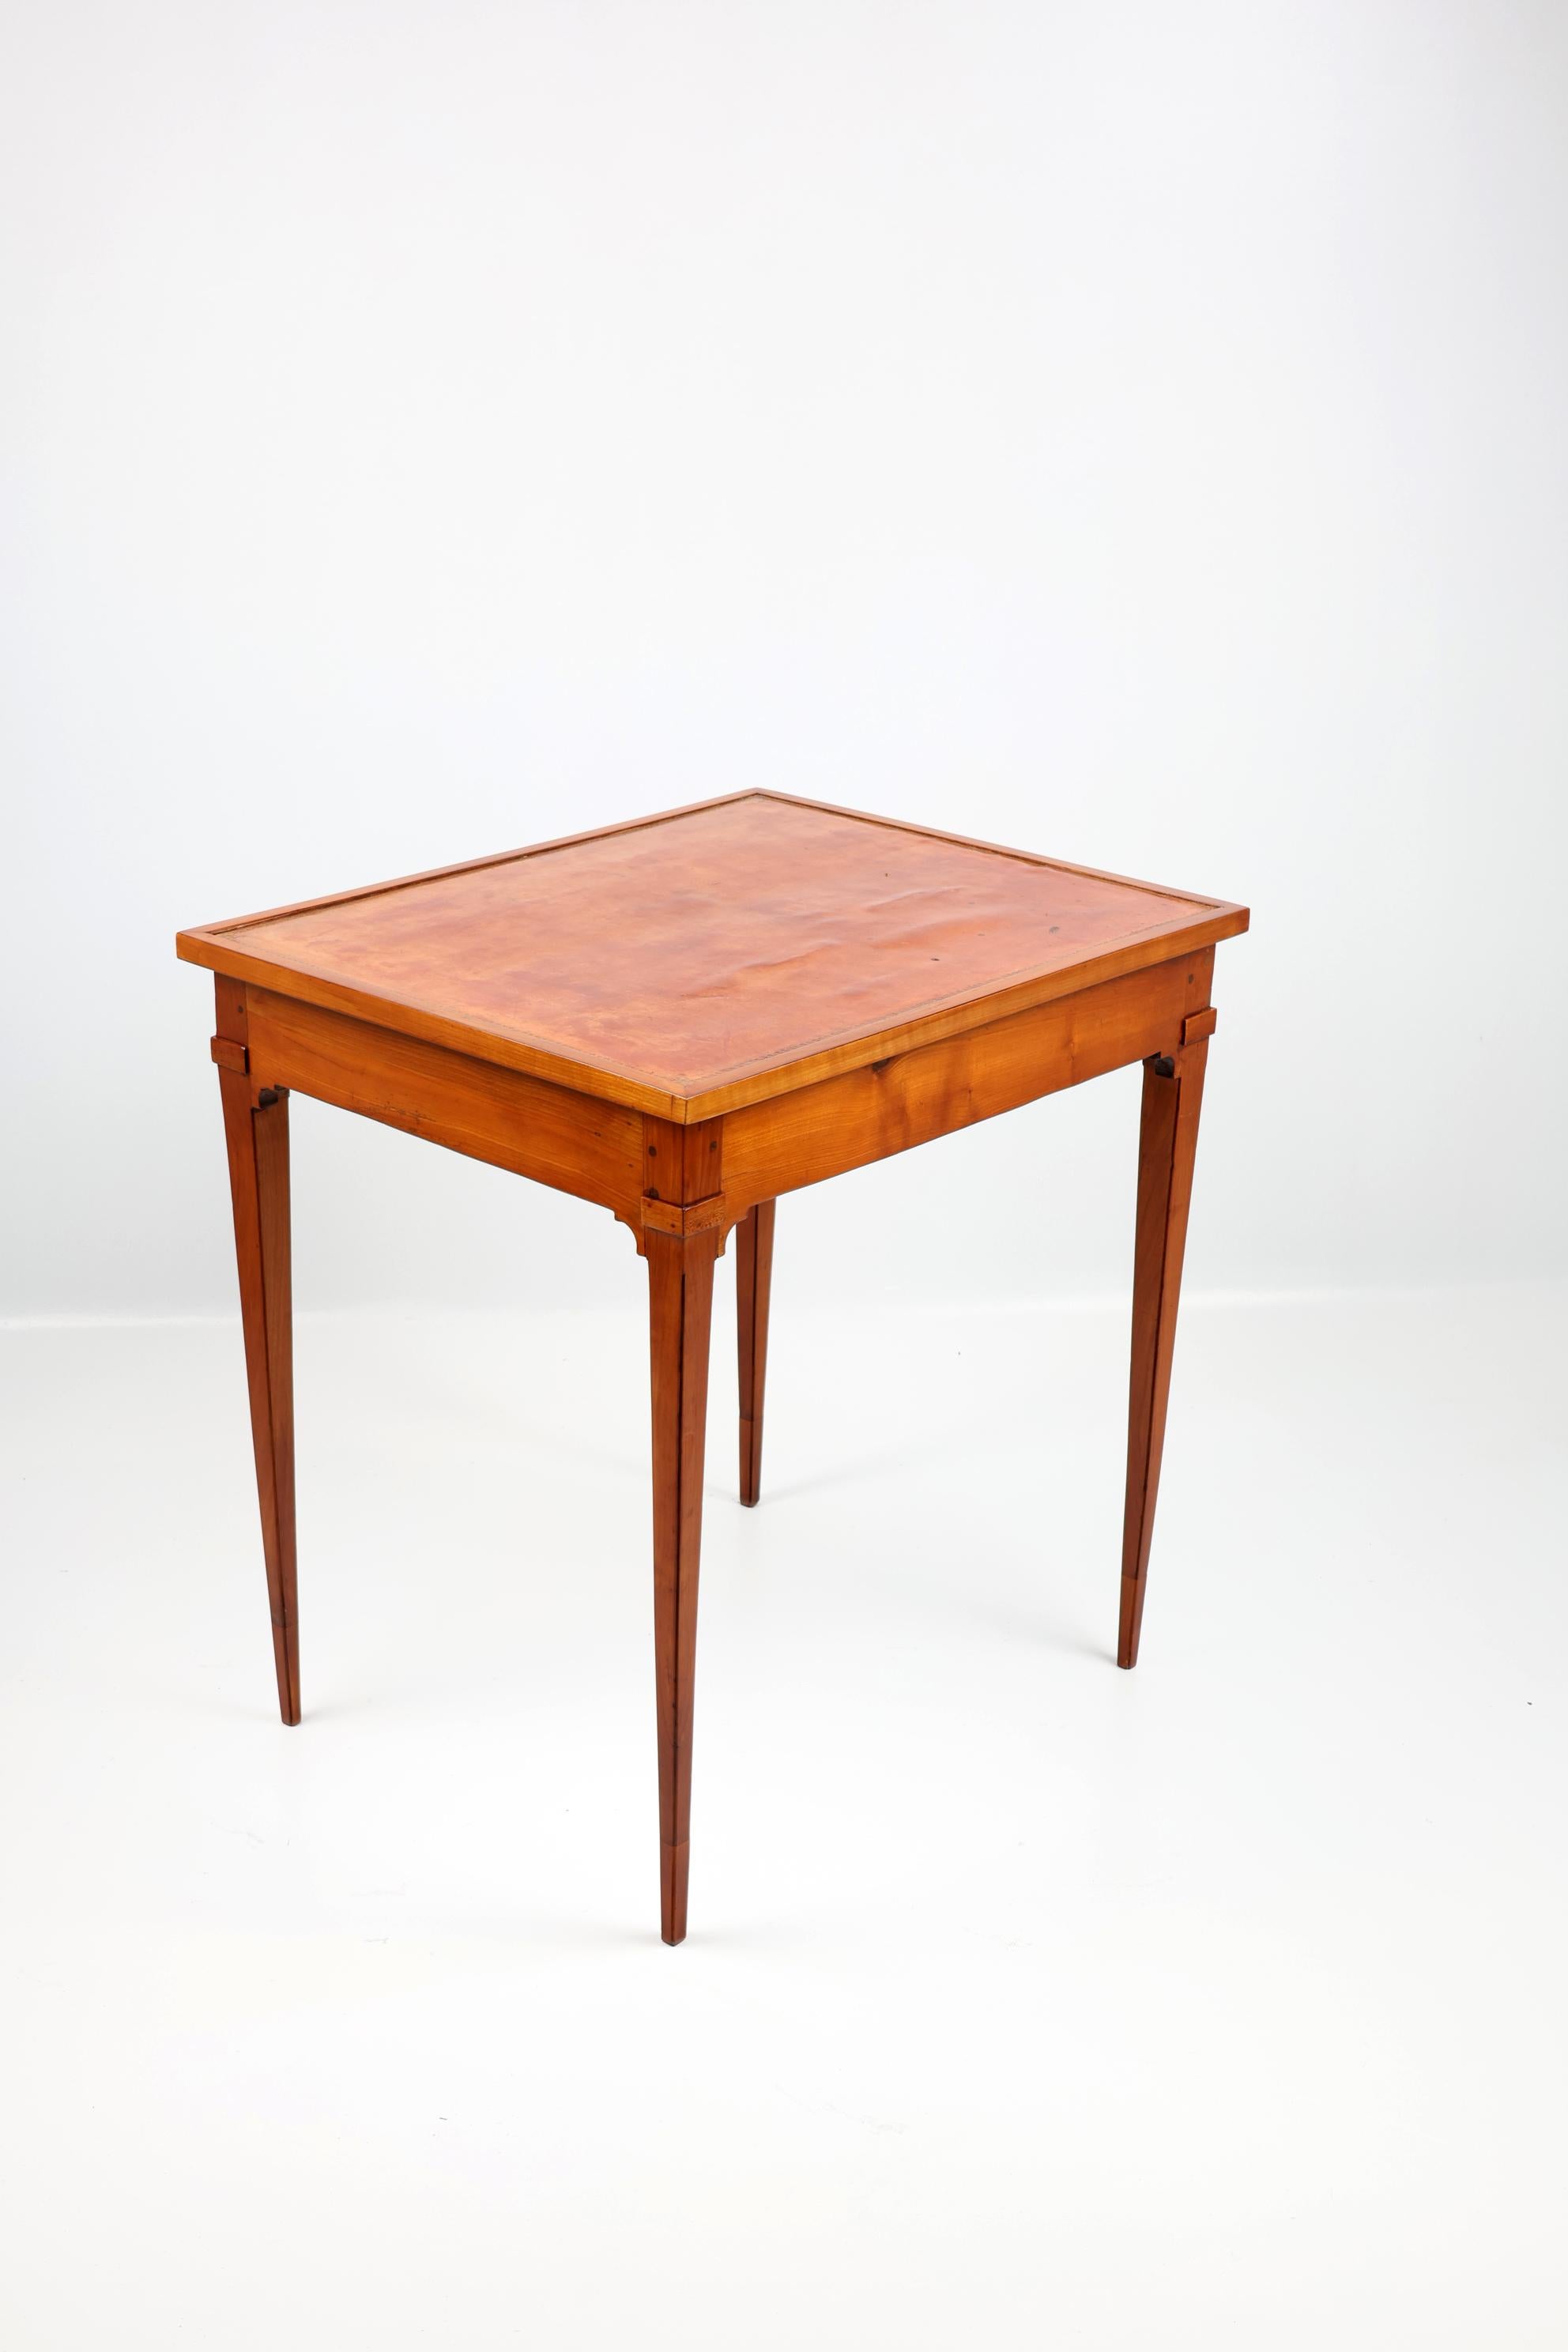 Early XIX century Tric Trac French Game Table,
1810-1820 France,
Cherry wood

Early XIX century Tric Trac game Table made of solid cherry wood with reversible top and marquetry. 
The table boasts a reversible top that's as functional as it is